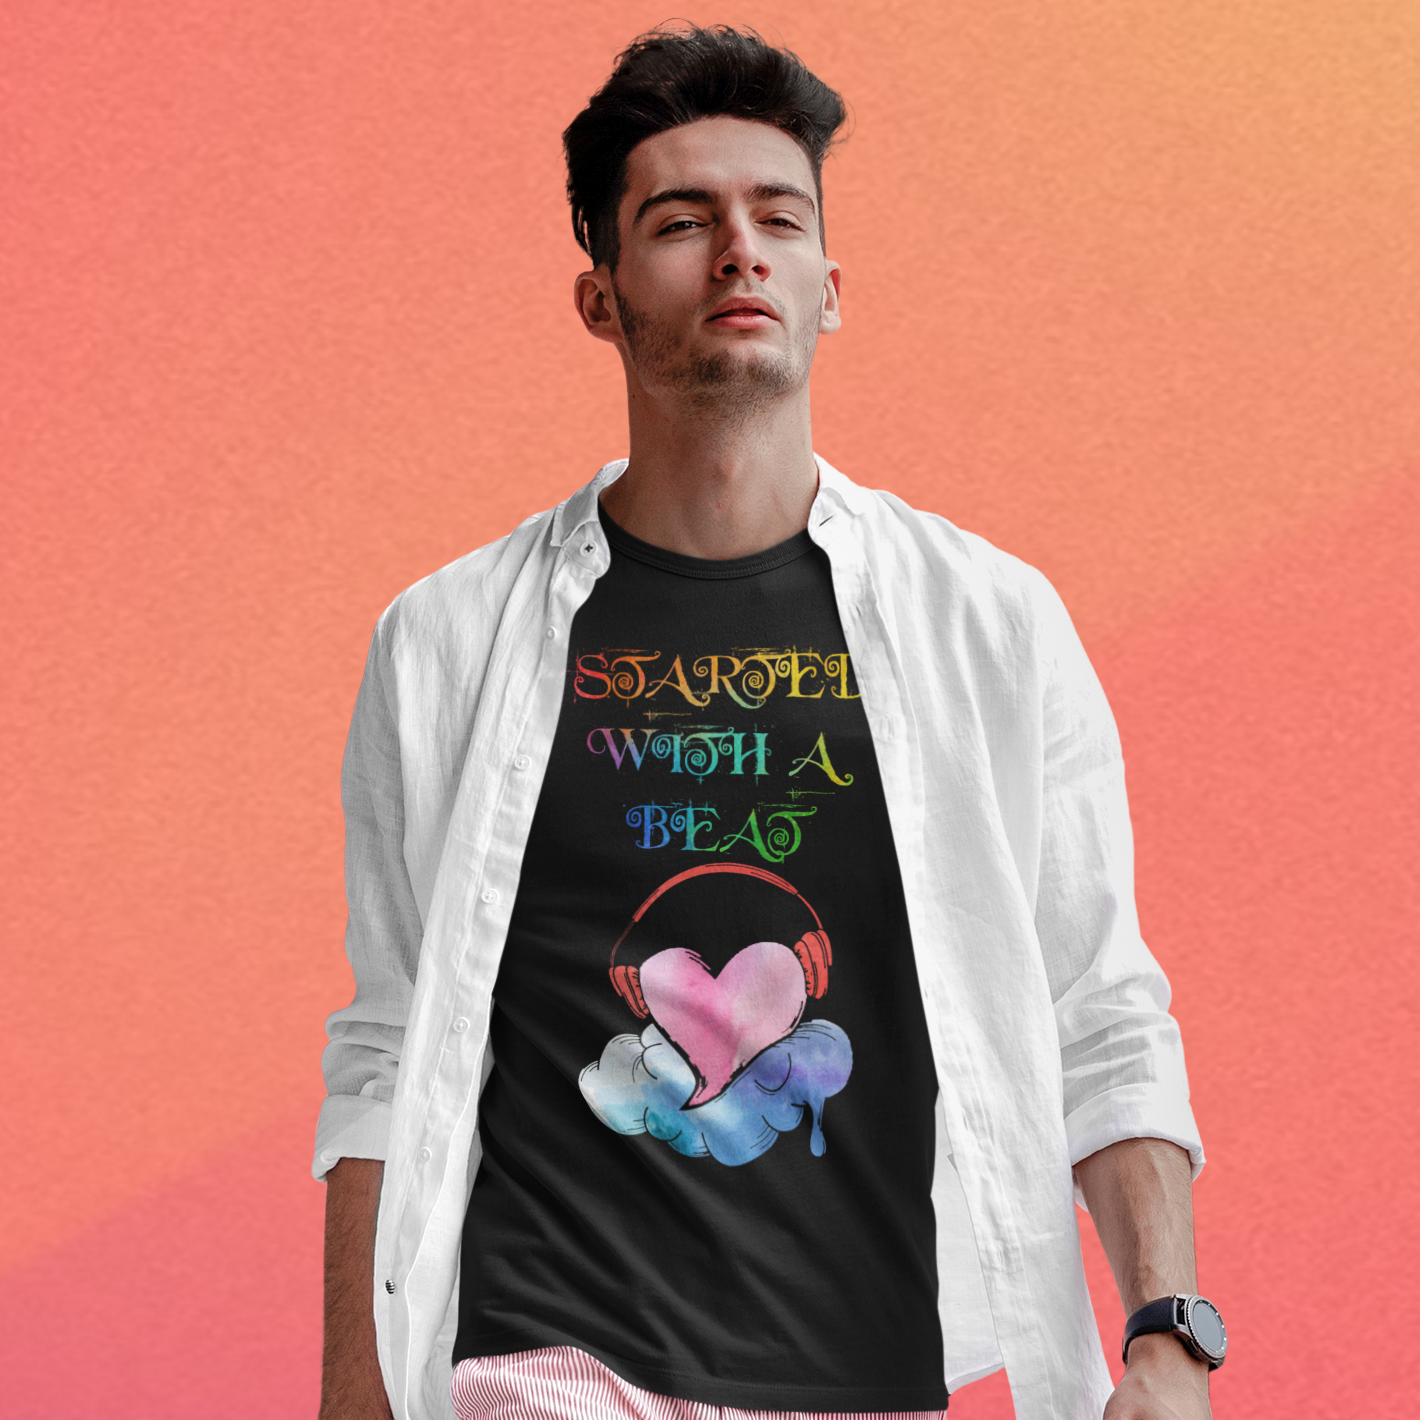 This BEAT T-SHIRT (MEN'S) is perfect for any night out. Made out of a durable cotton blend, this rave inspired black t-shirt is made to last. Get ready to rock the night away with this comfortable piece that is sure to make a statement.